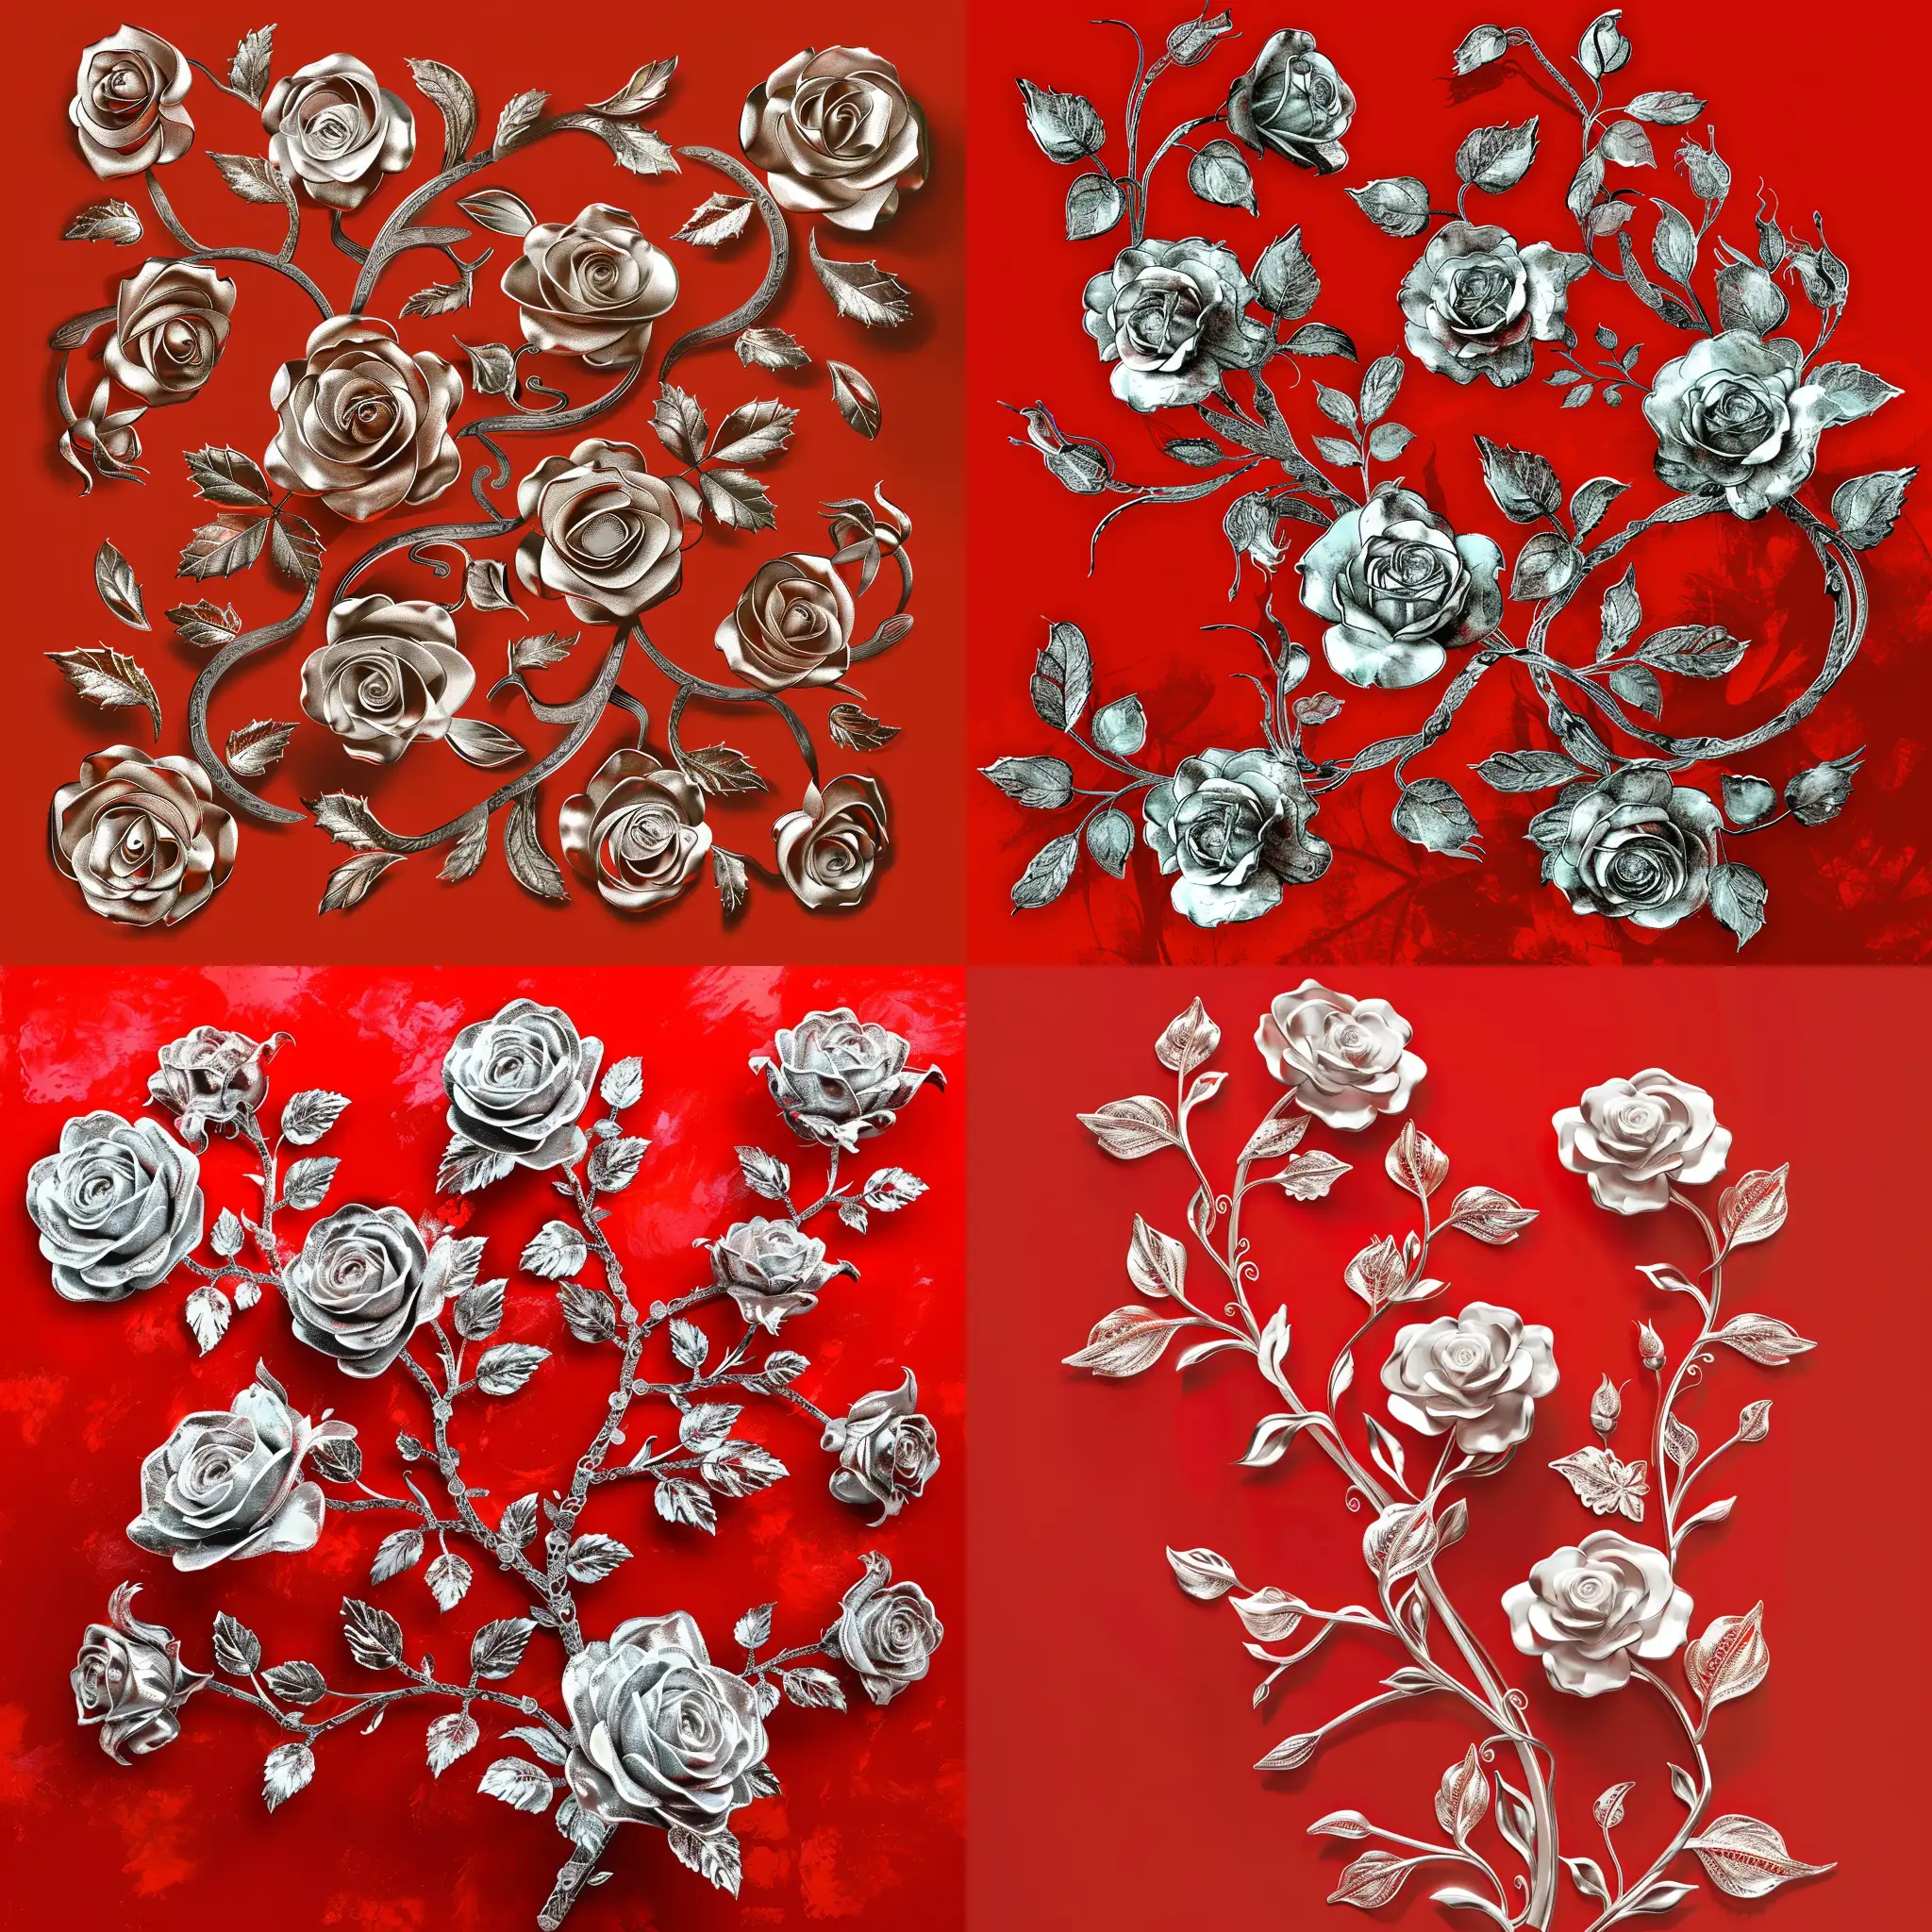 Filigree of silver roses, on a bright red background, clean digital painting